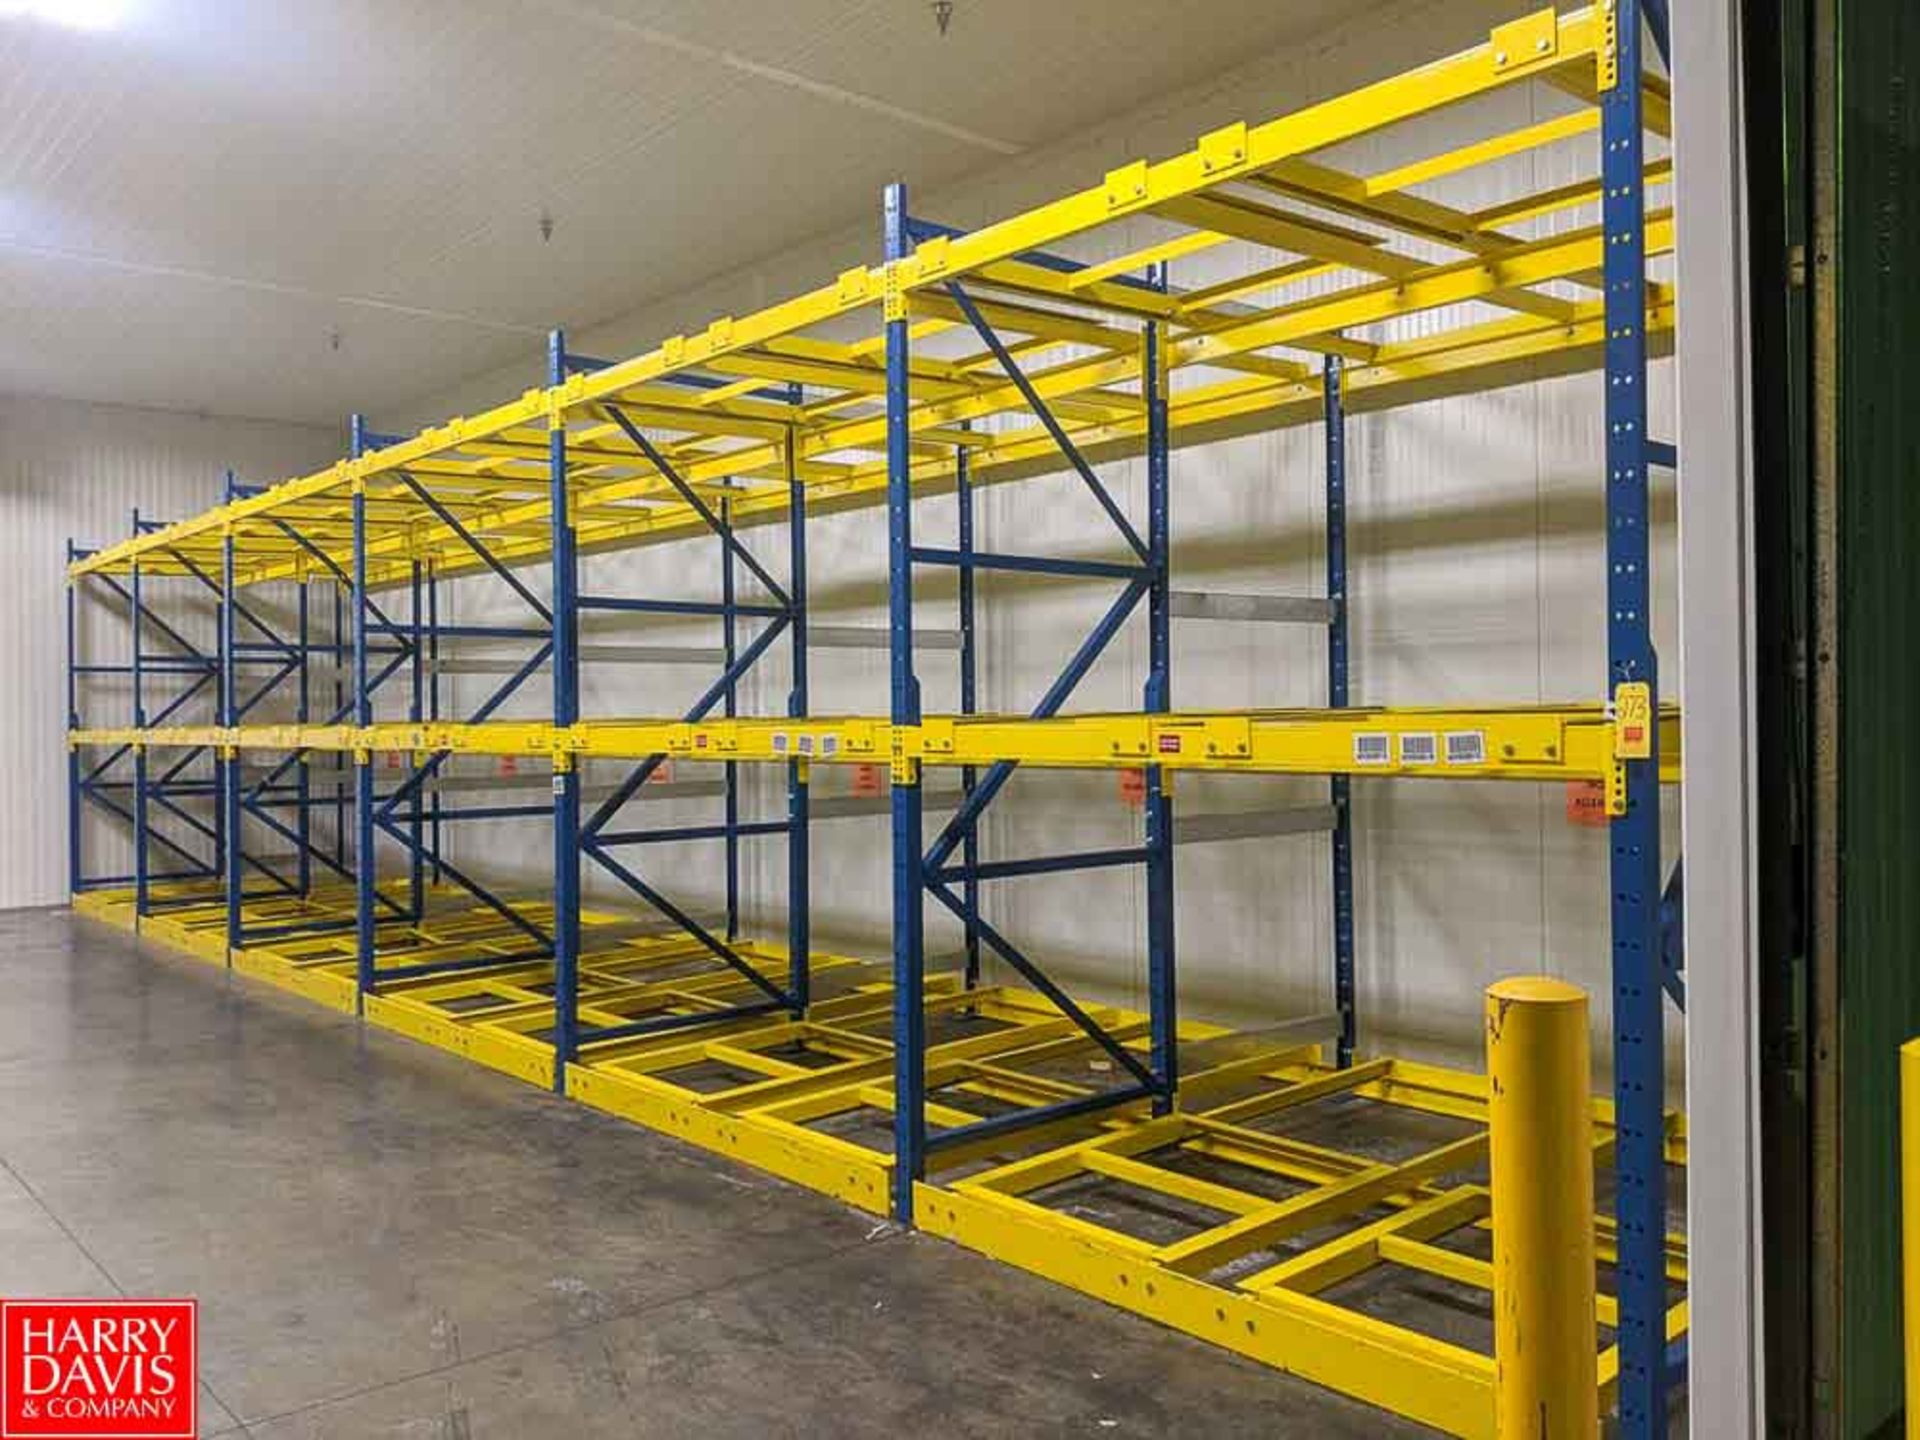 Sections of Heavy Duty Pallet Racking Rigging Fee: $1200 - Image 2 of 2